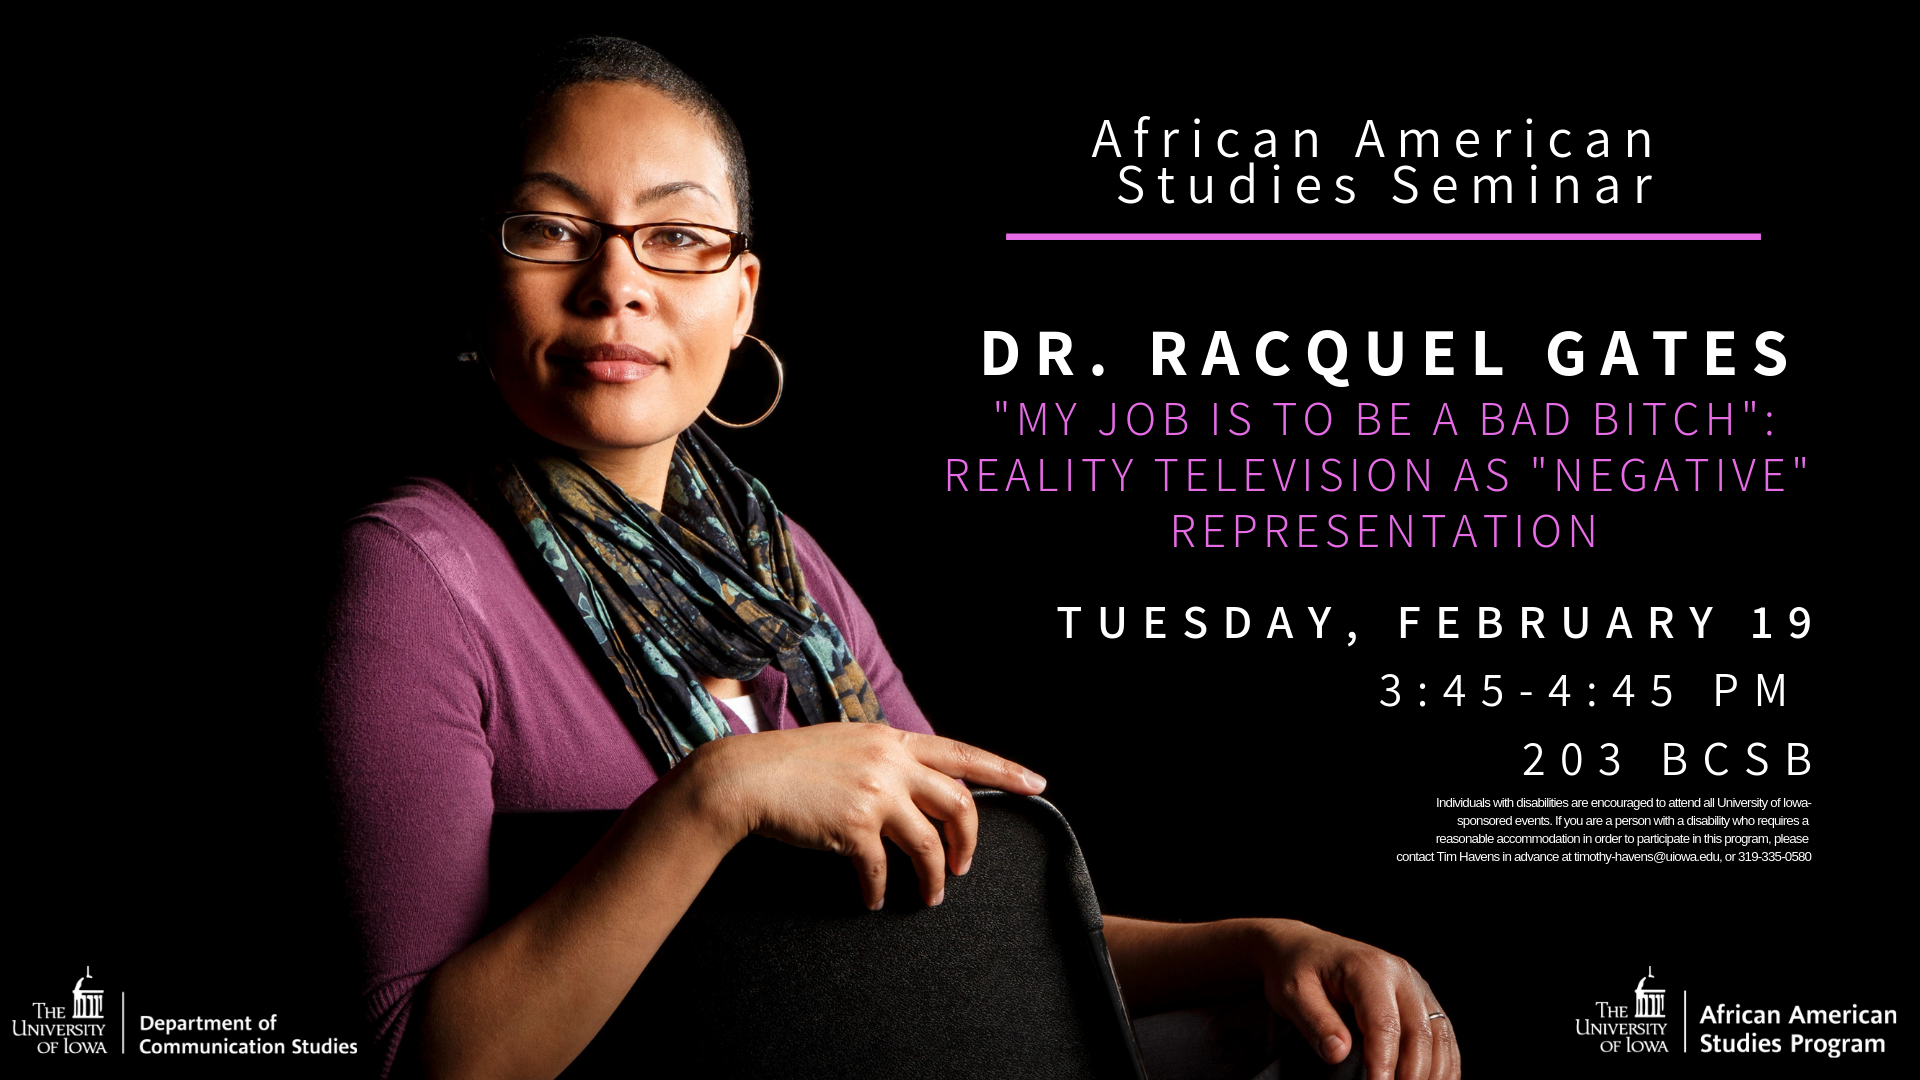 African American Studies Seminar: Dr. Racquel Gates - "My Job is to be a Bad Bitch": Reality Television  as "Negative" Representation. Tuesday, February 19, 3:45-4:45 PM, 203 BCSB